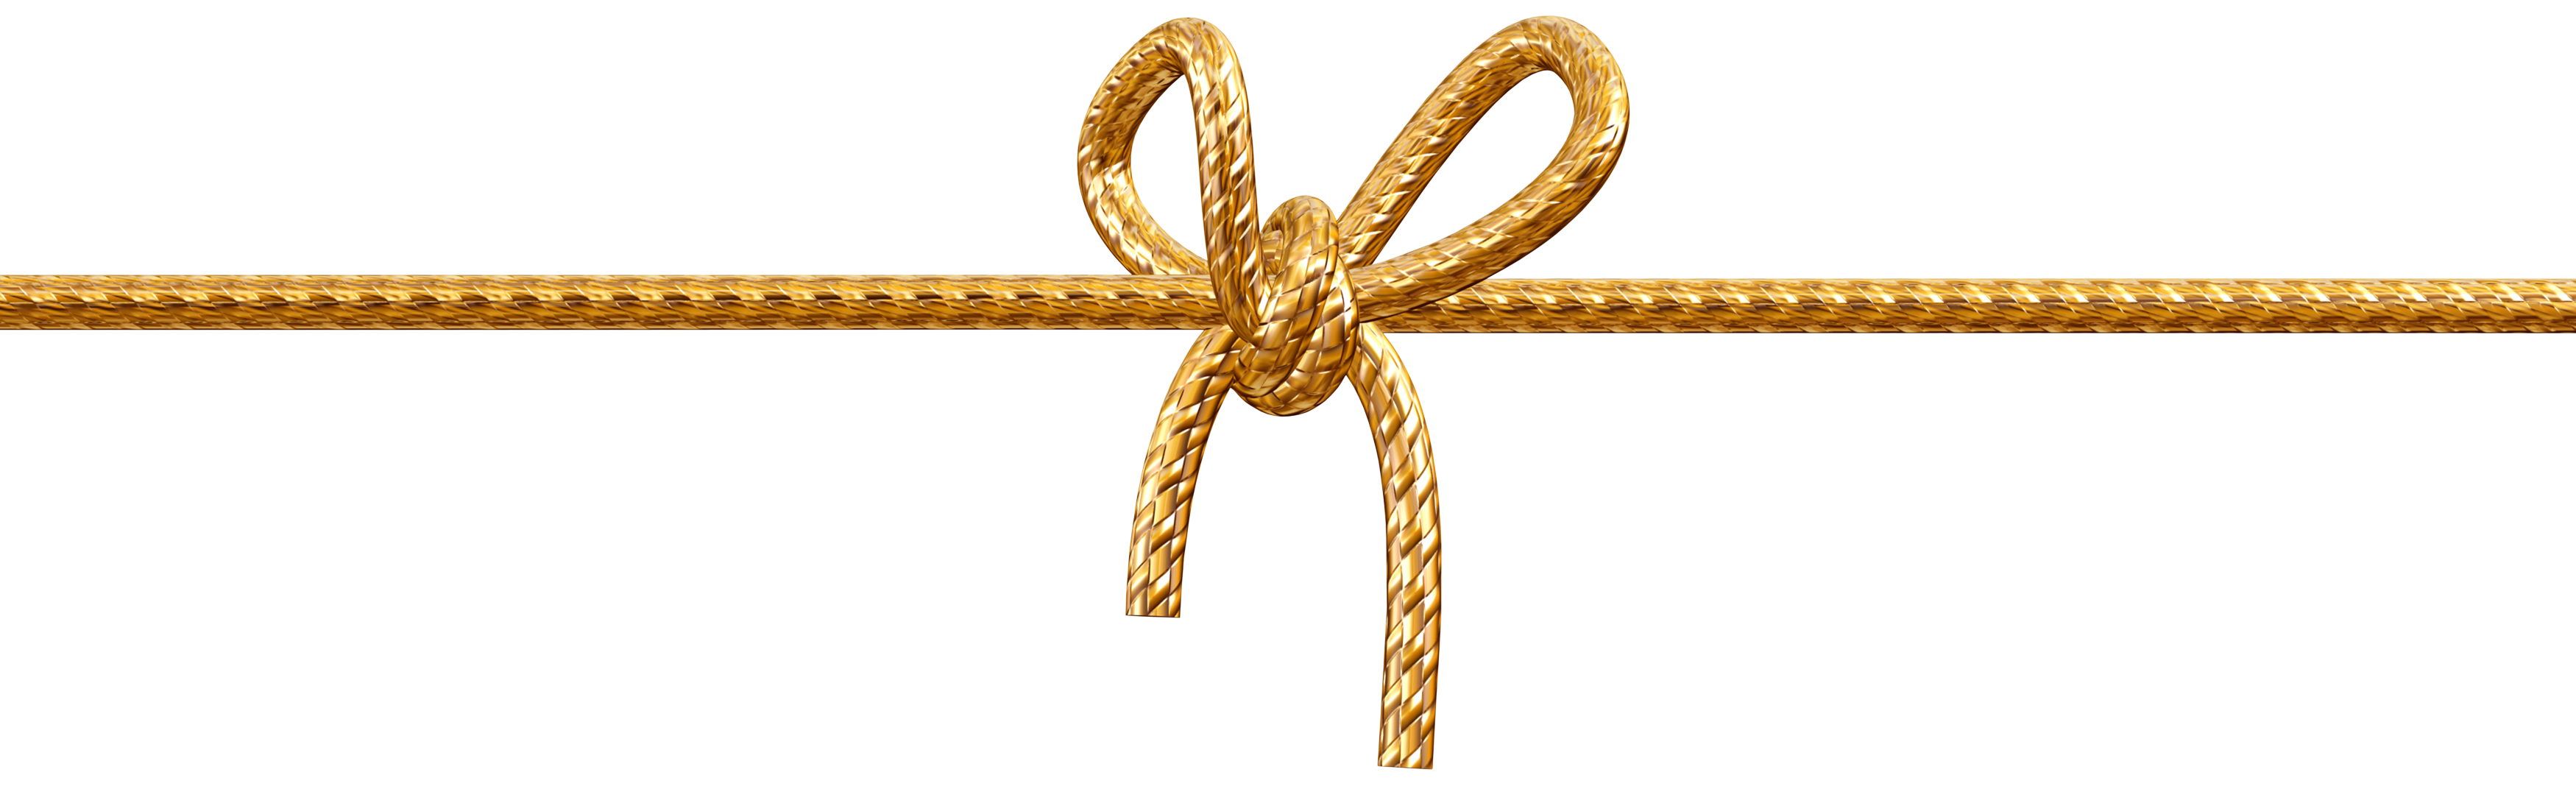 rope_PNG18110.png 